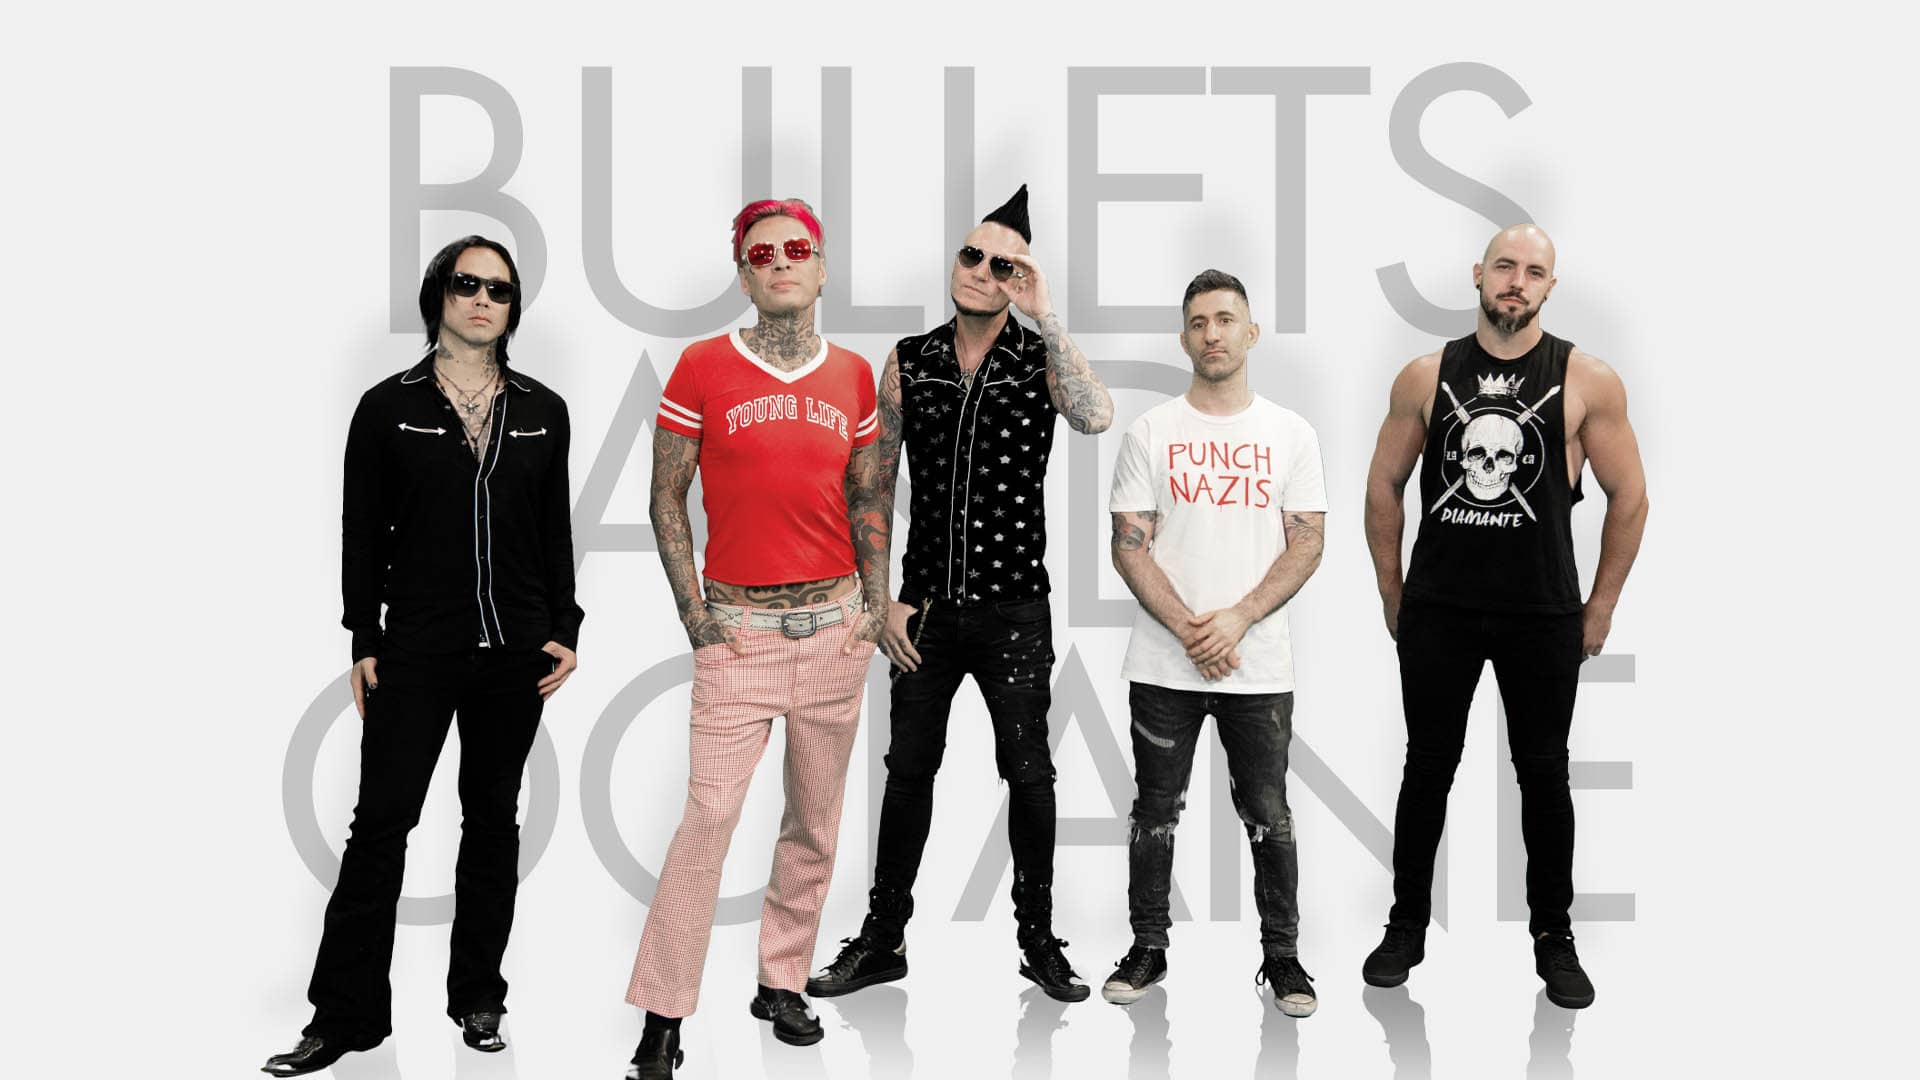 Rock band Bullets And Octane posing against a white background with their band name in large letters.